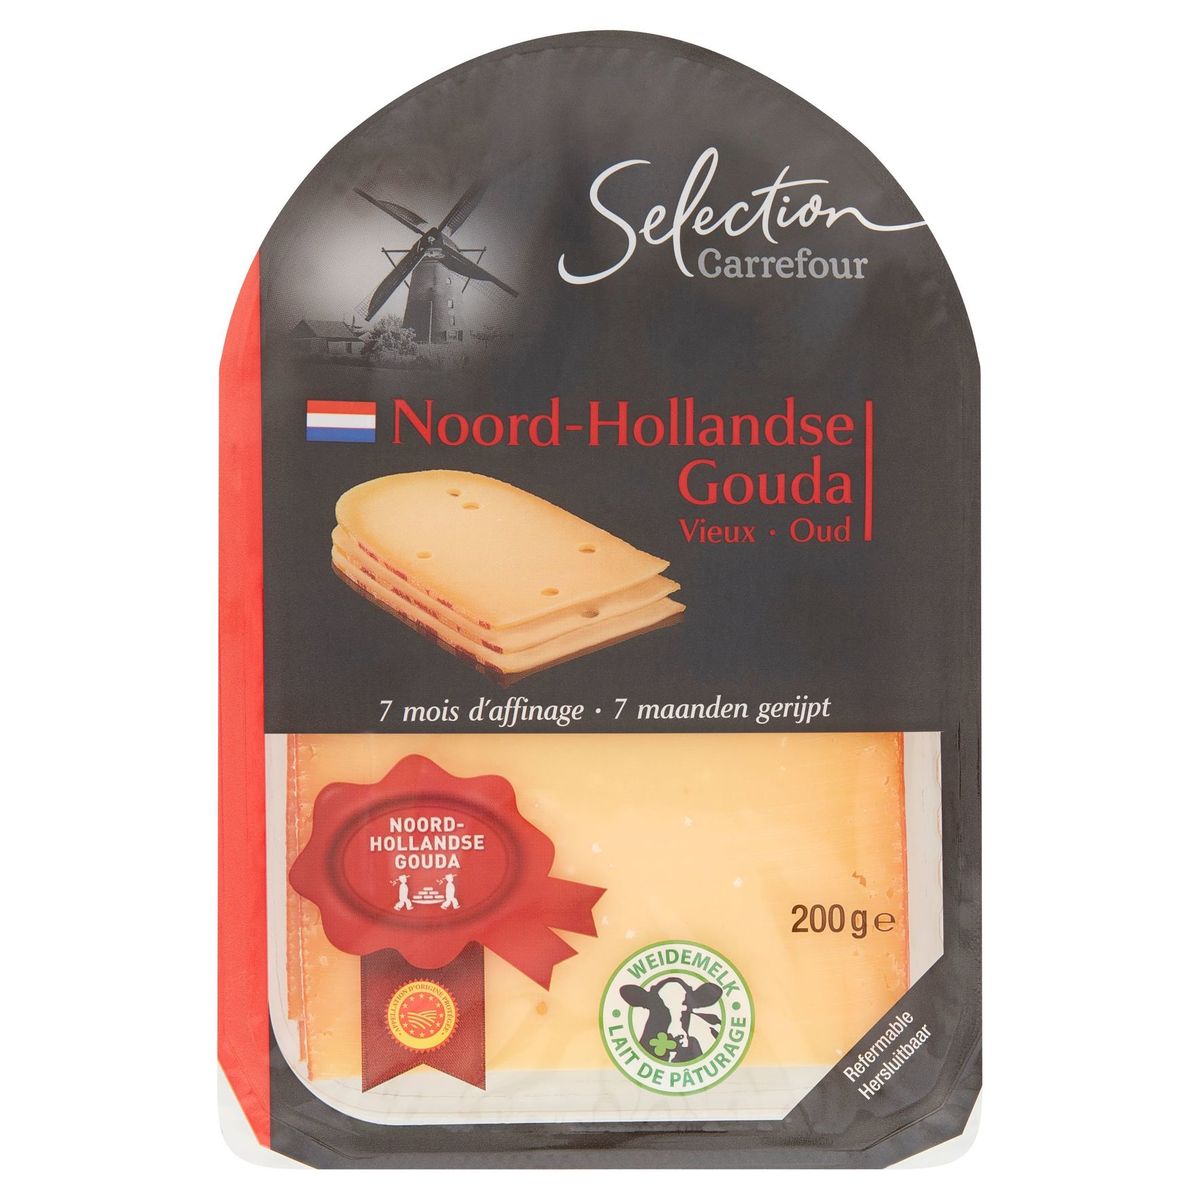 Carrefour Selection Noord-Hollandse Gouda Vieux tranches 200 g